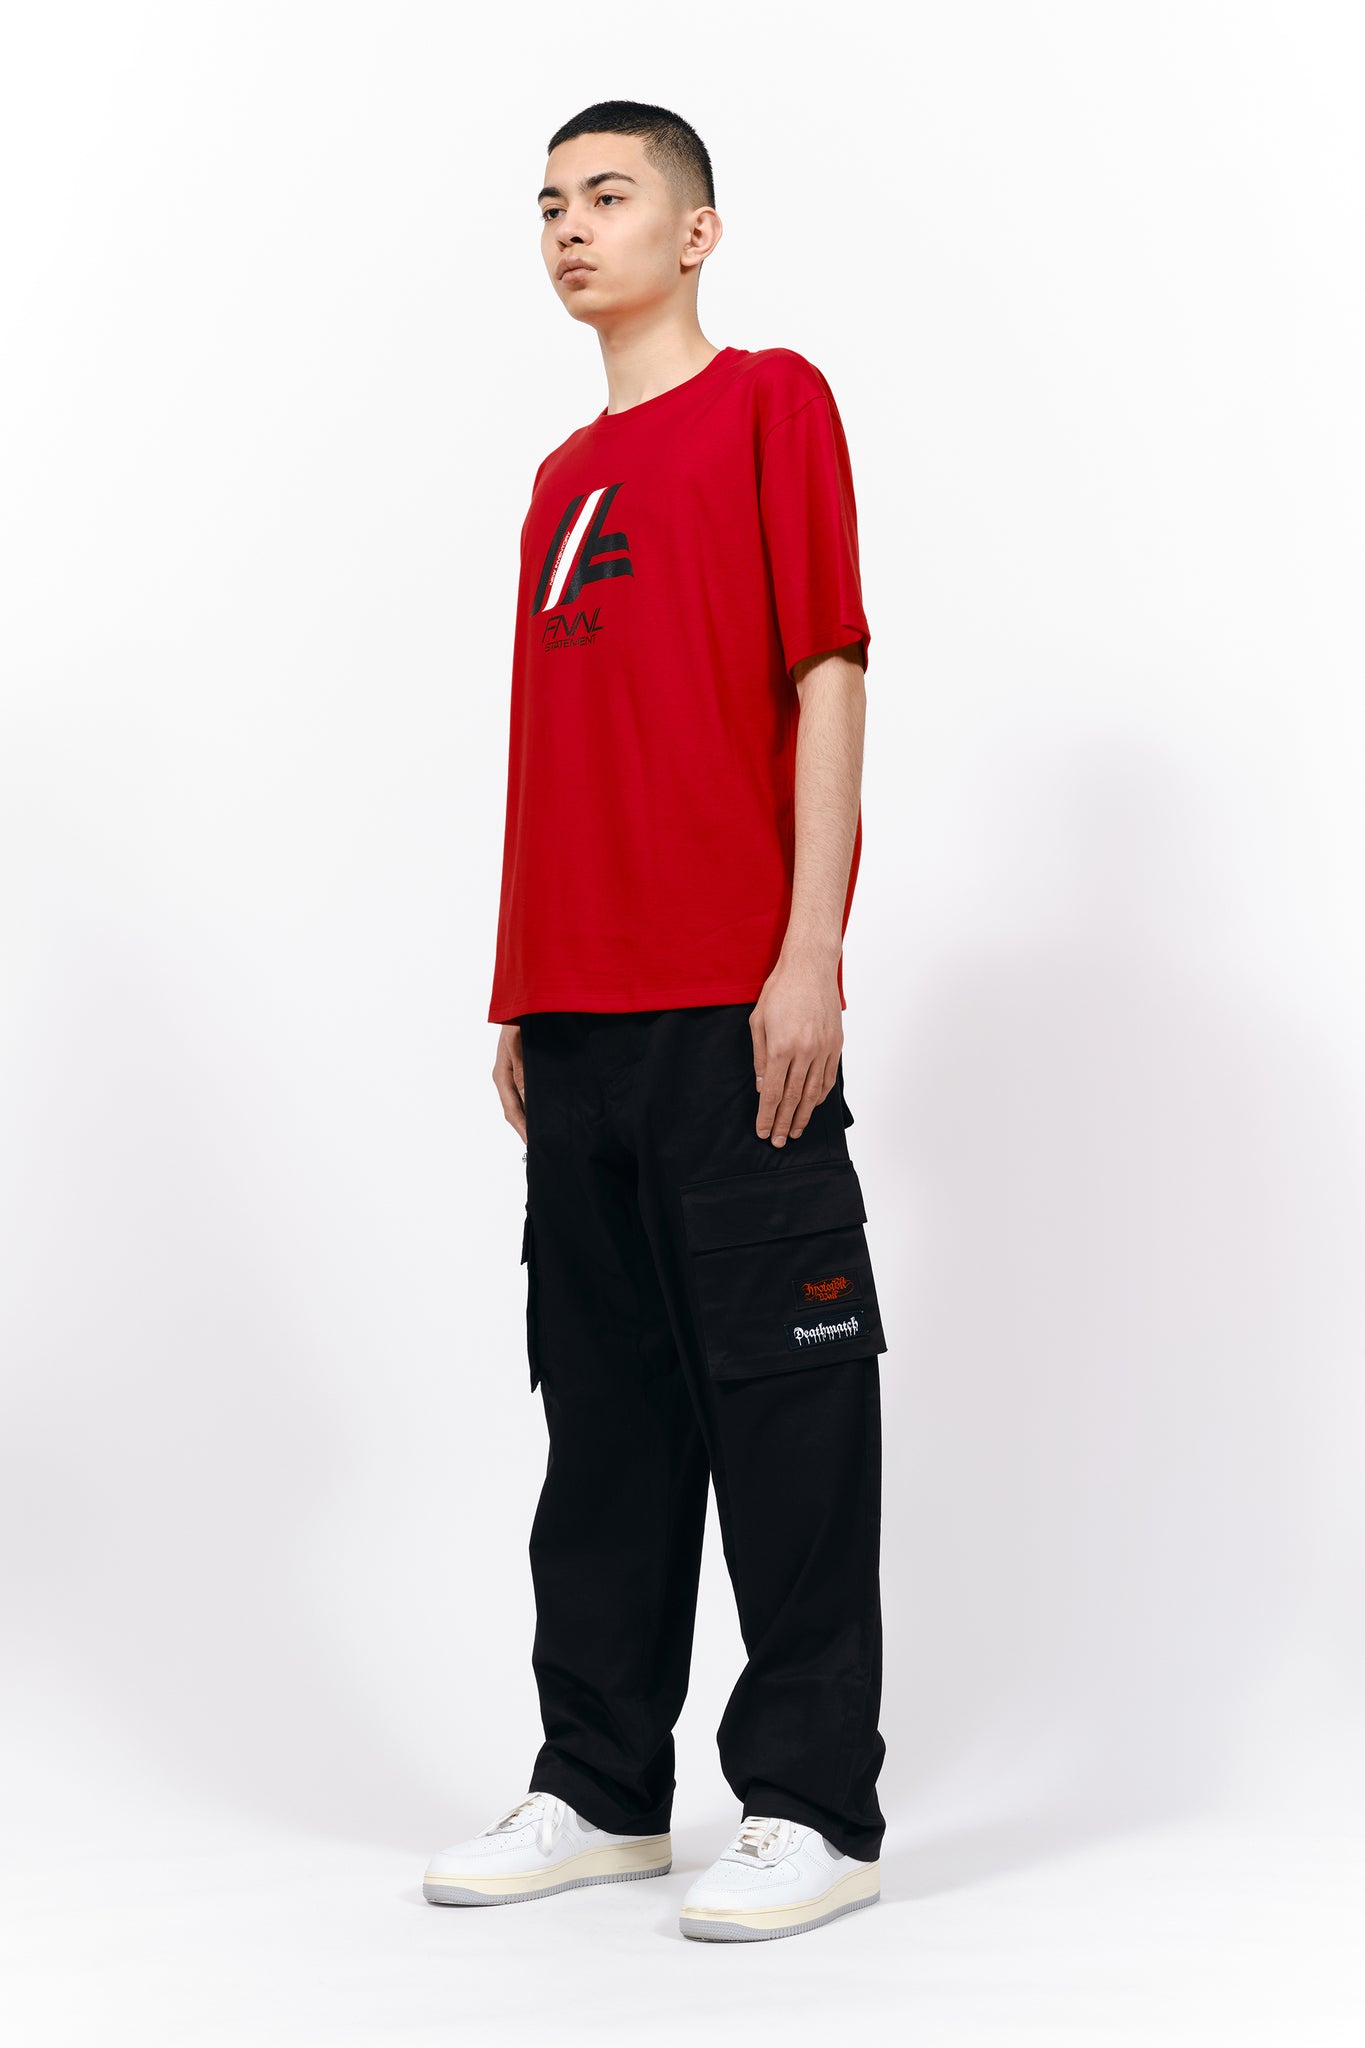 STATEMENT PRINTED T-SHIRT/RED